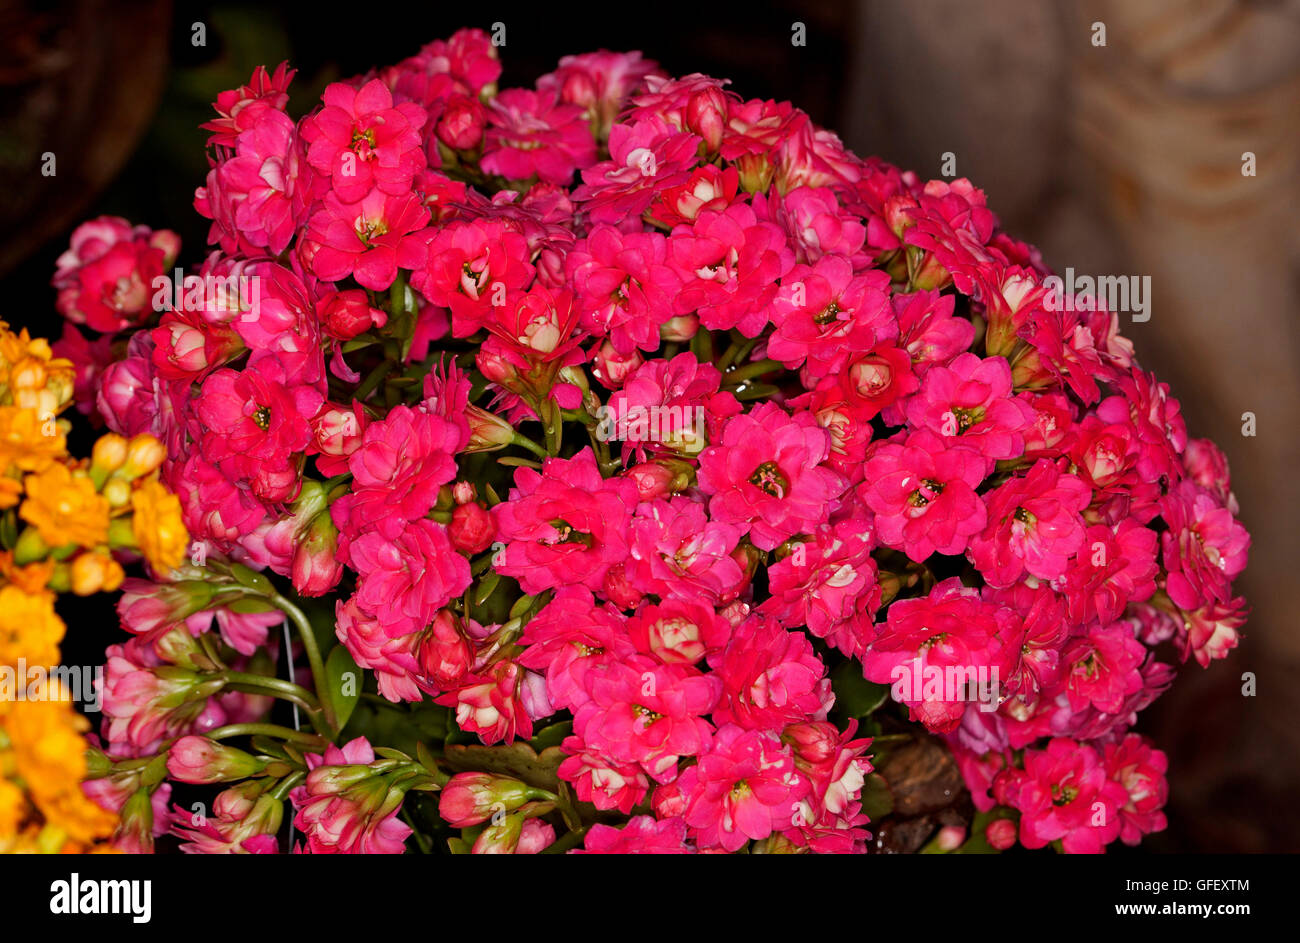 Close-up of dense cluster of vivid double red / pink flowers of succulent plant Kalanchoe blossfeldiana hybrid Stock Photo